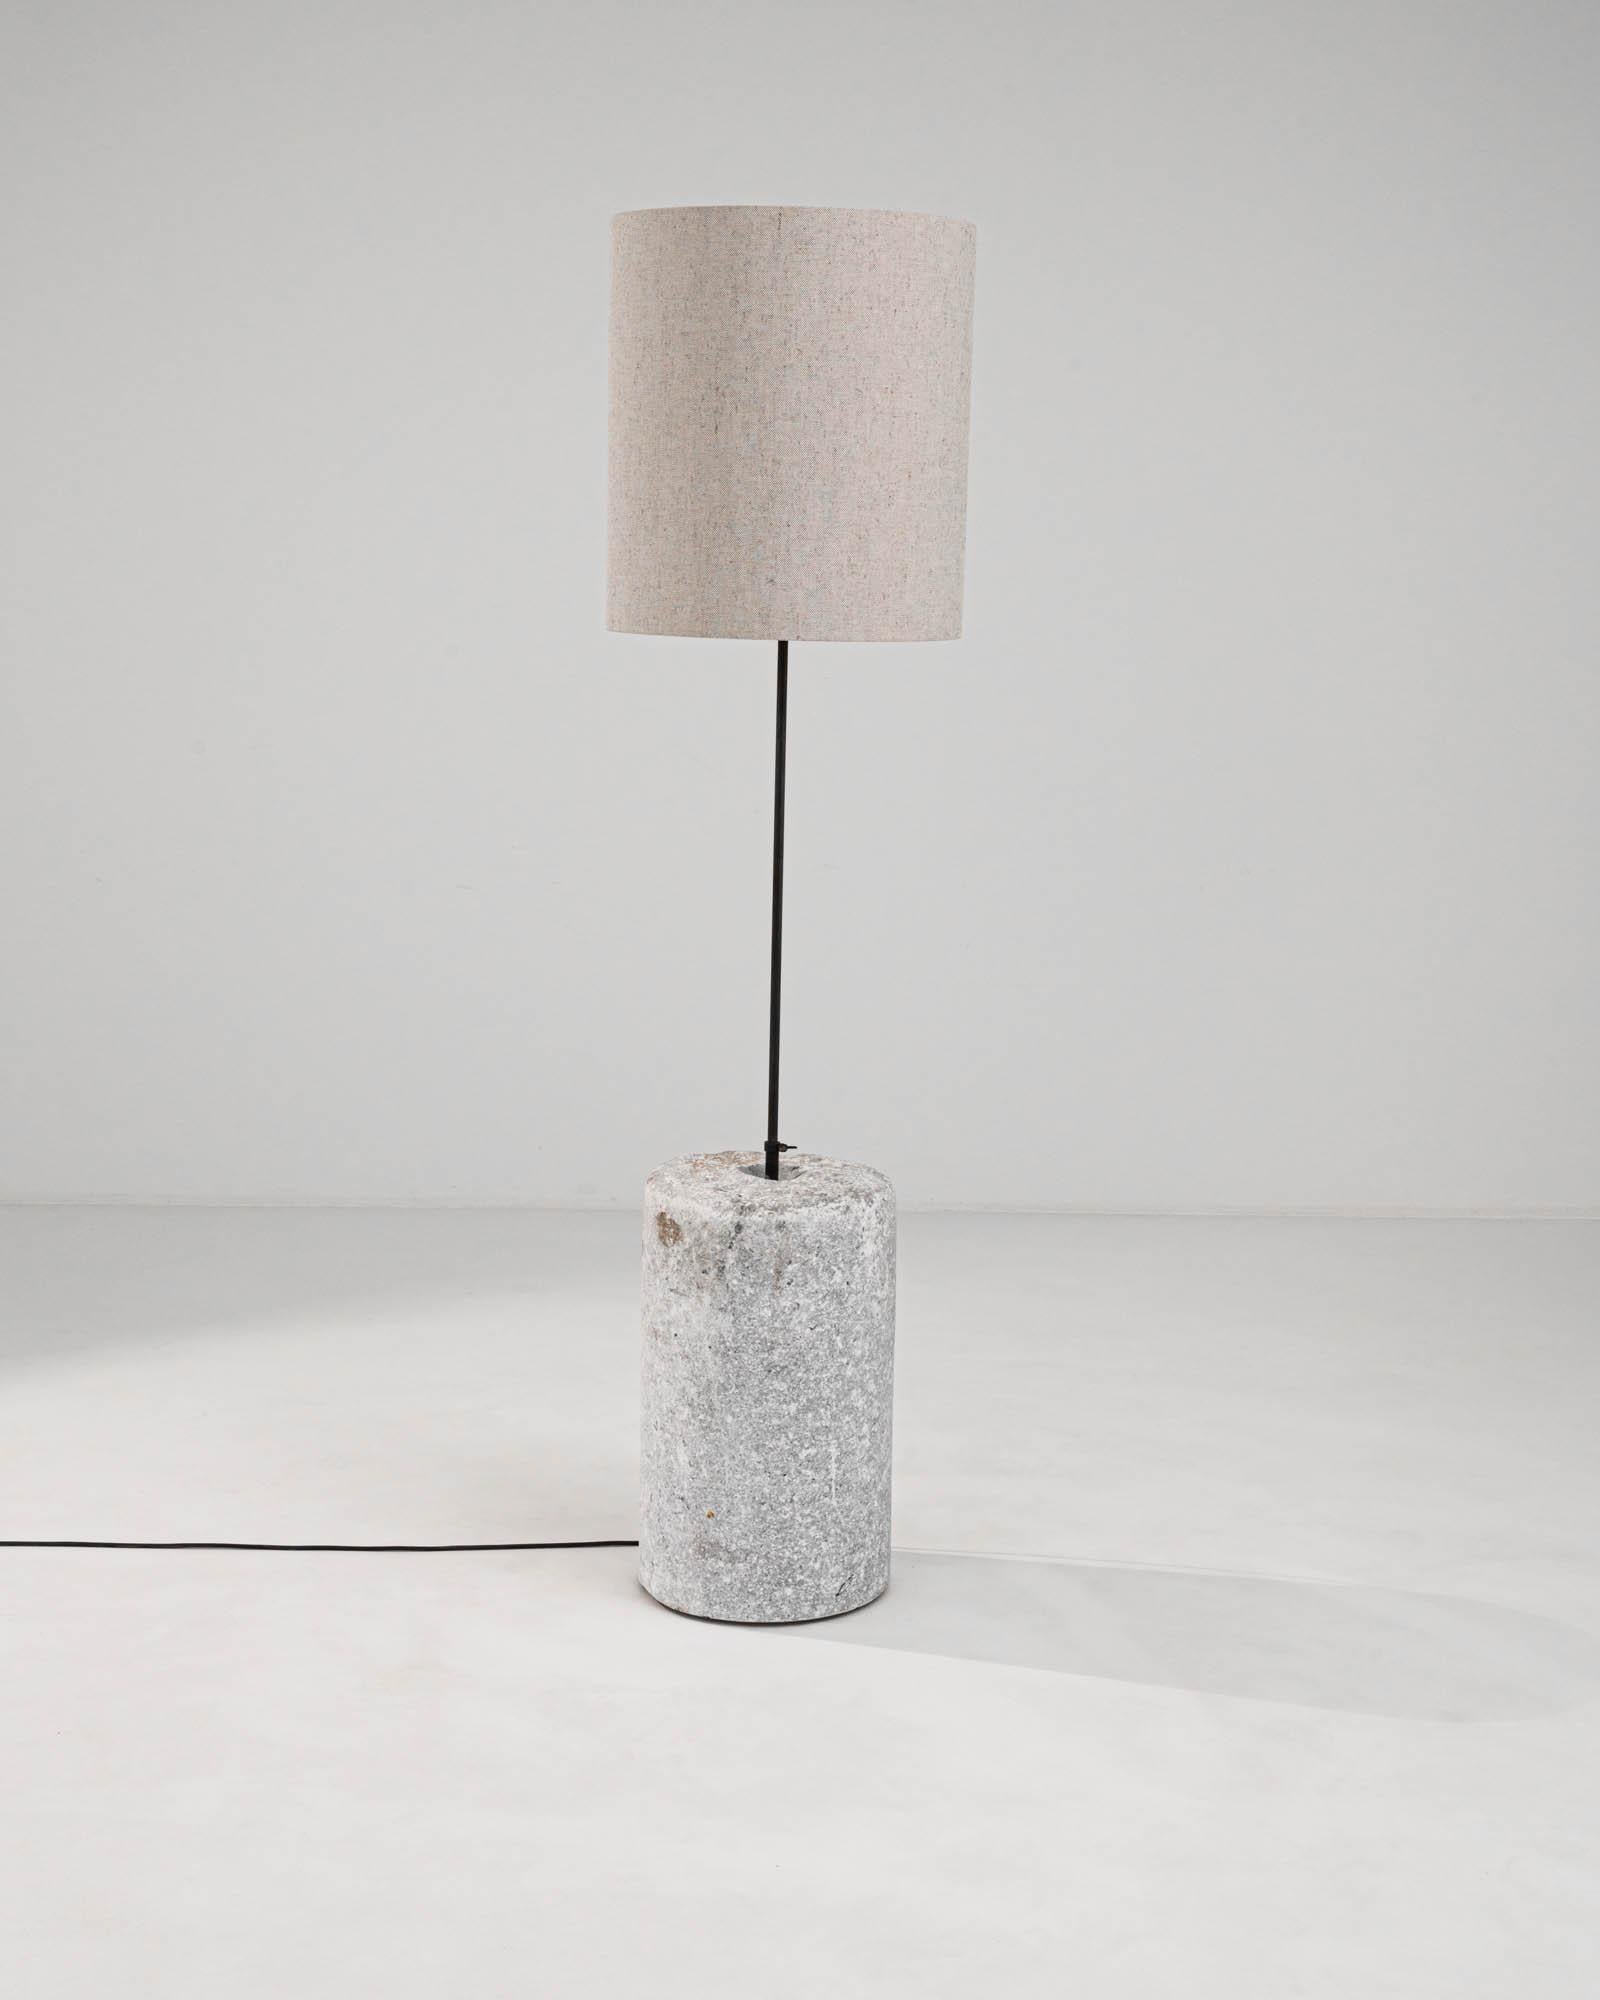 Introducing our early 1900s-inspired European Marble & Metal Floor Lamp, an elegant blend of classic charm and contemporary design. This exquisite piece features a robust, cylindrical base of genuine marble, boasting natural grey veining and